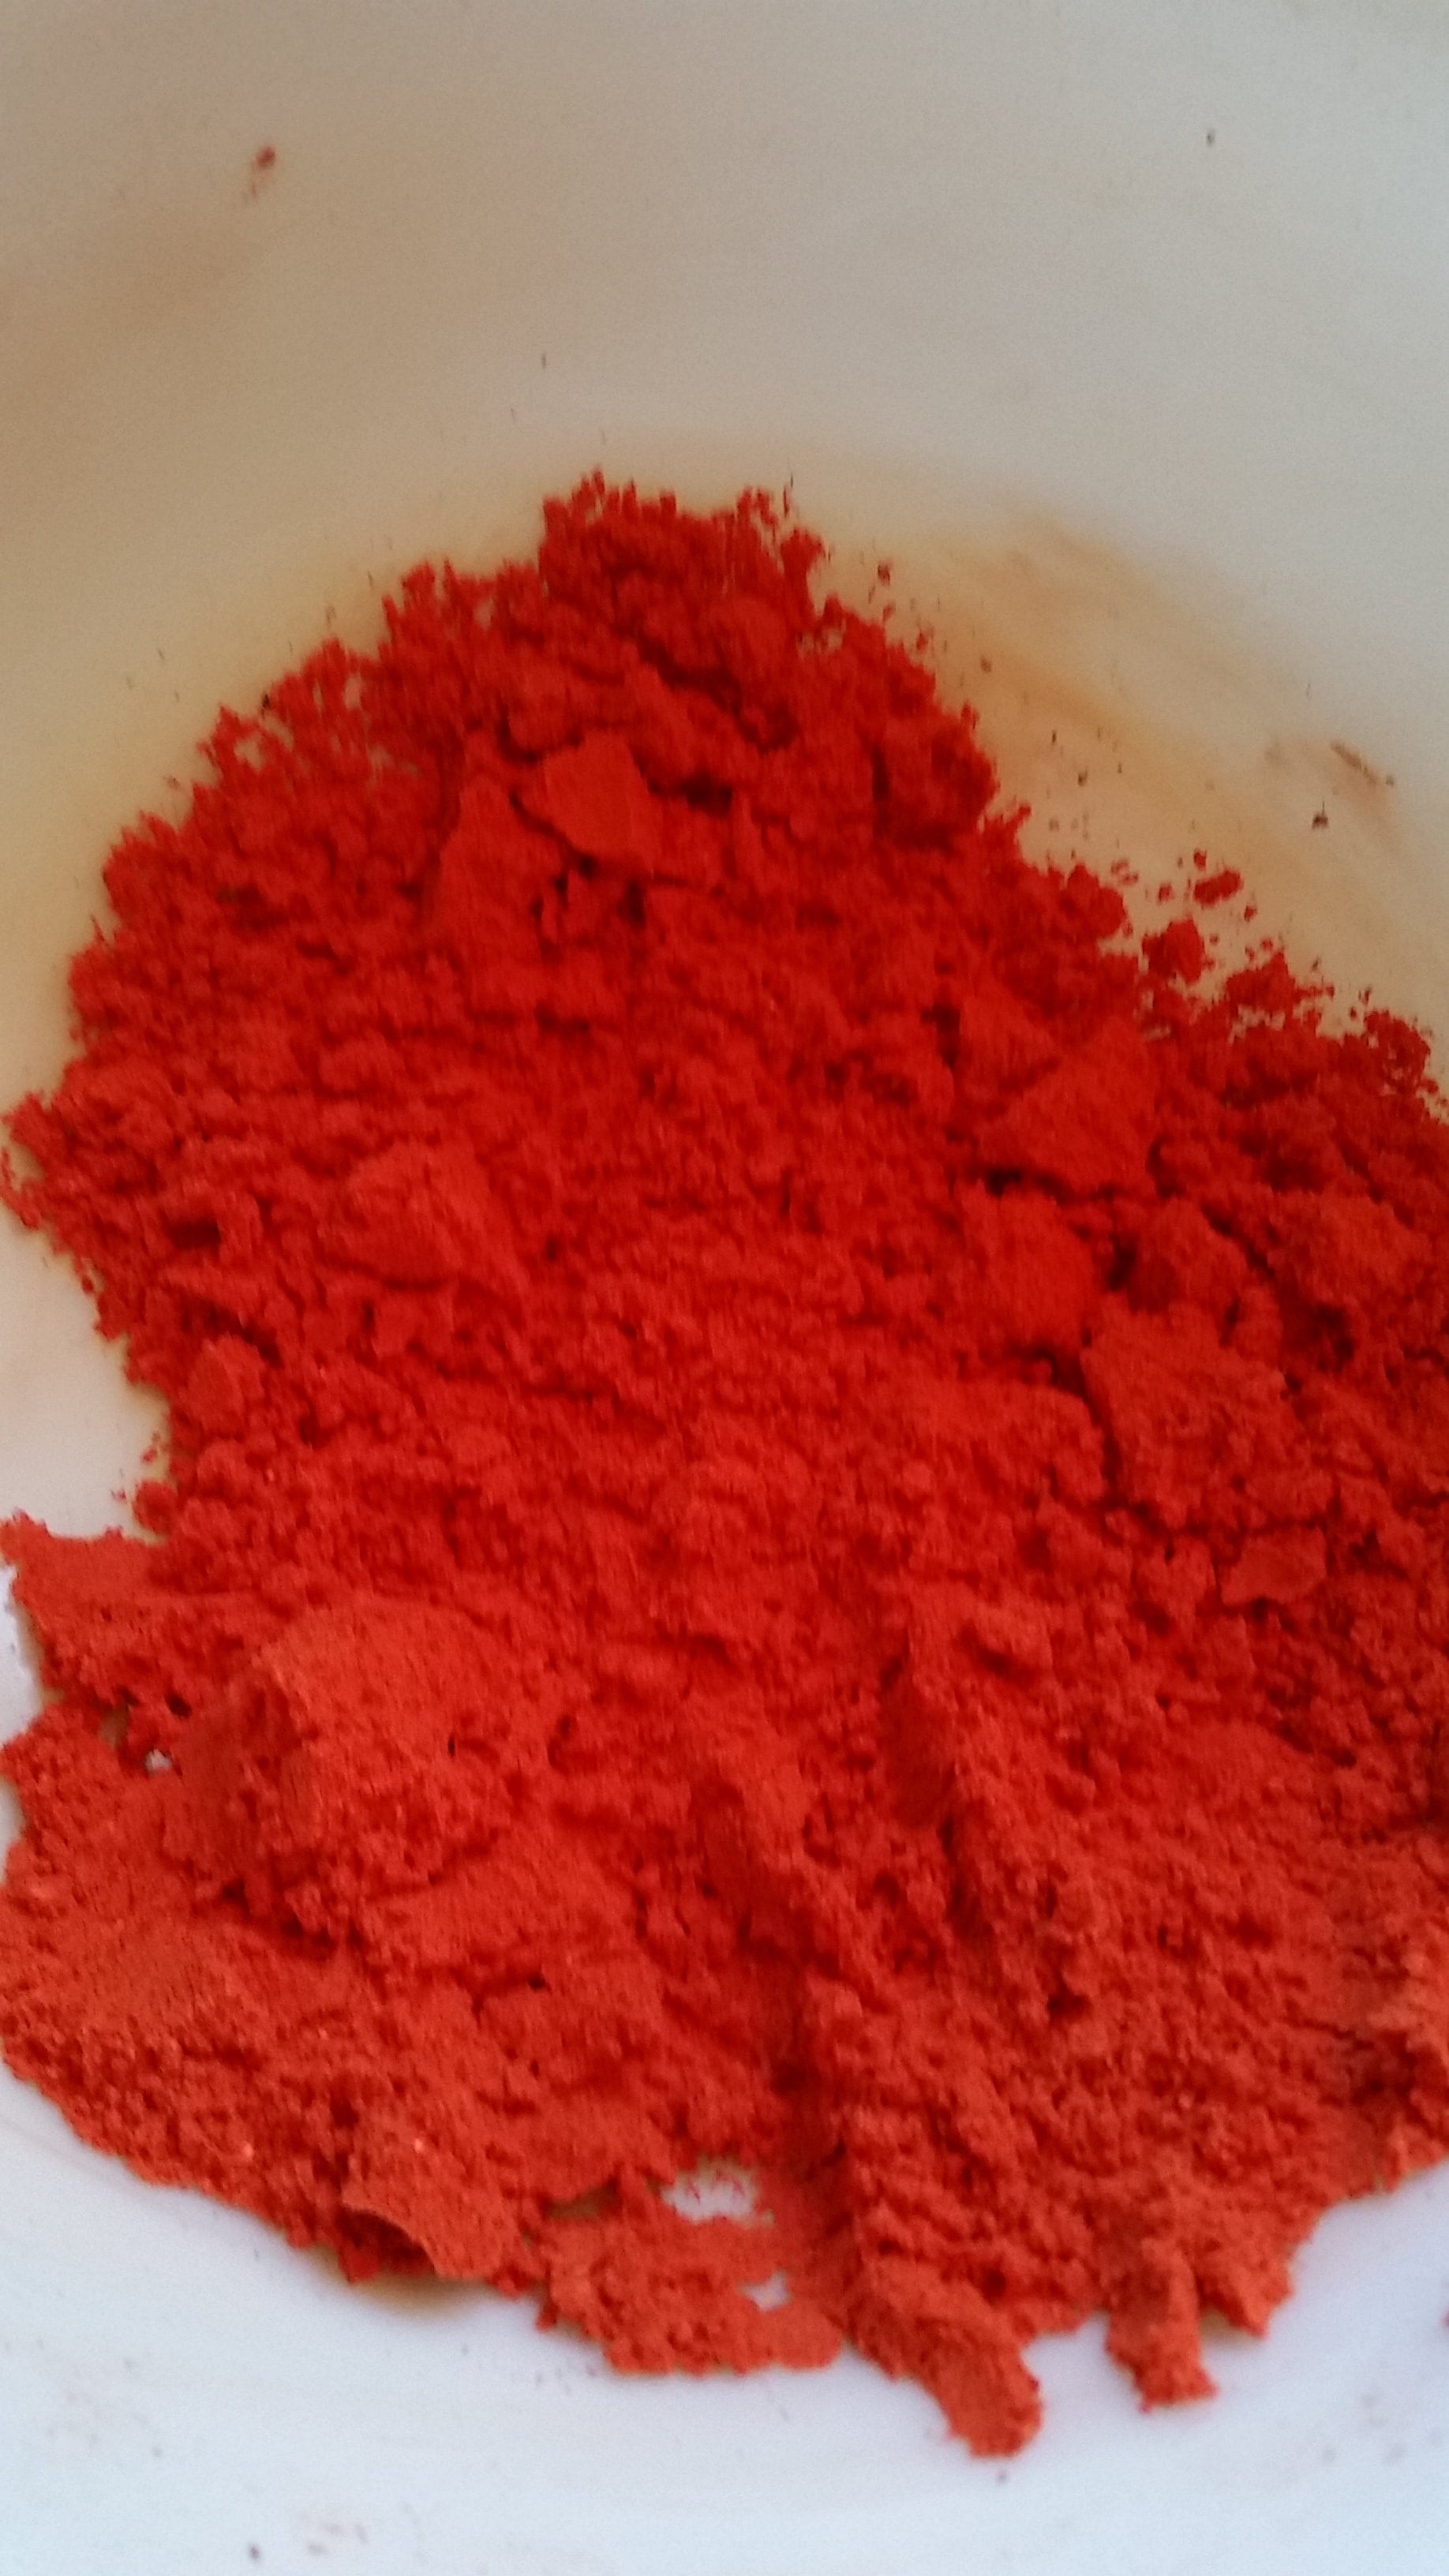 EazyColours REd 40 Water Soluble Dye